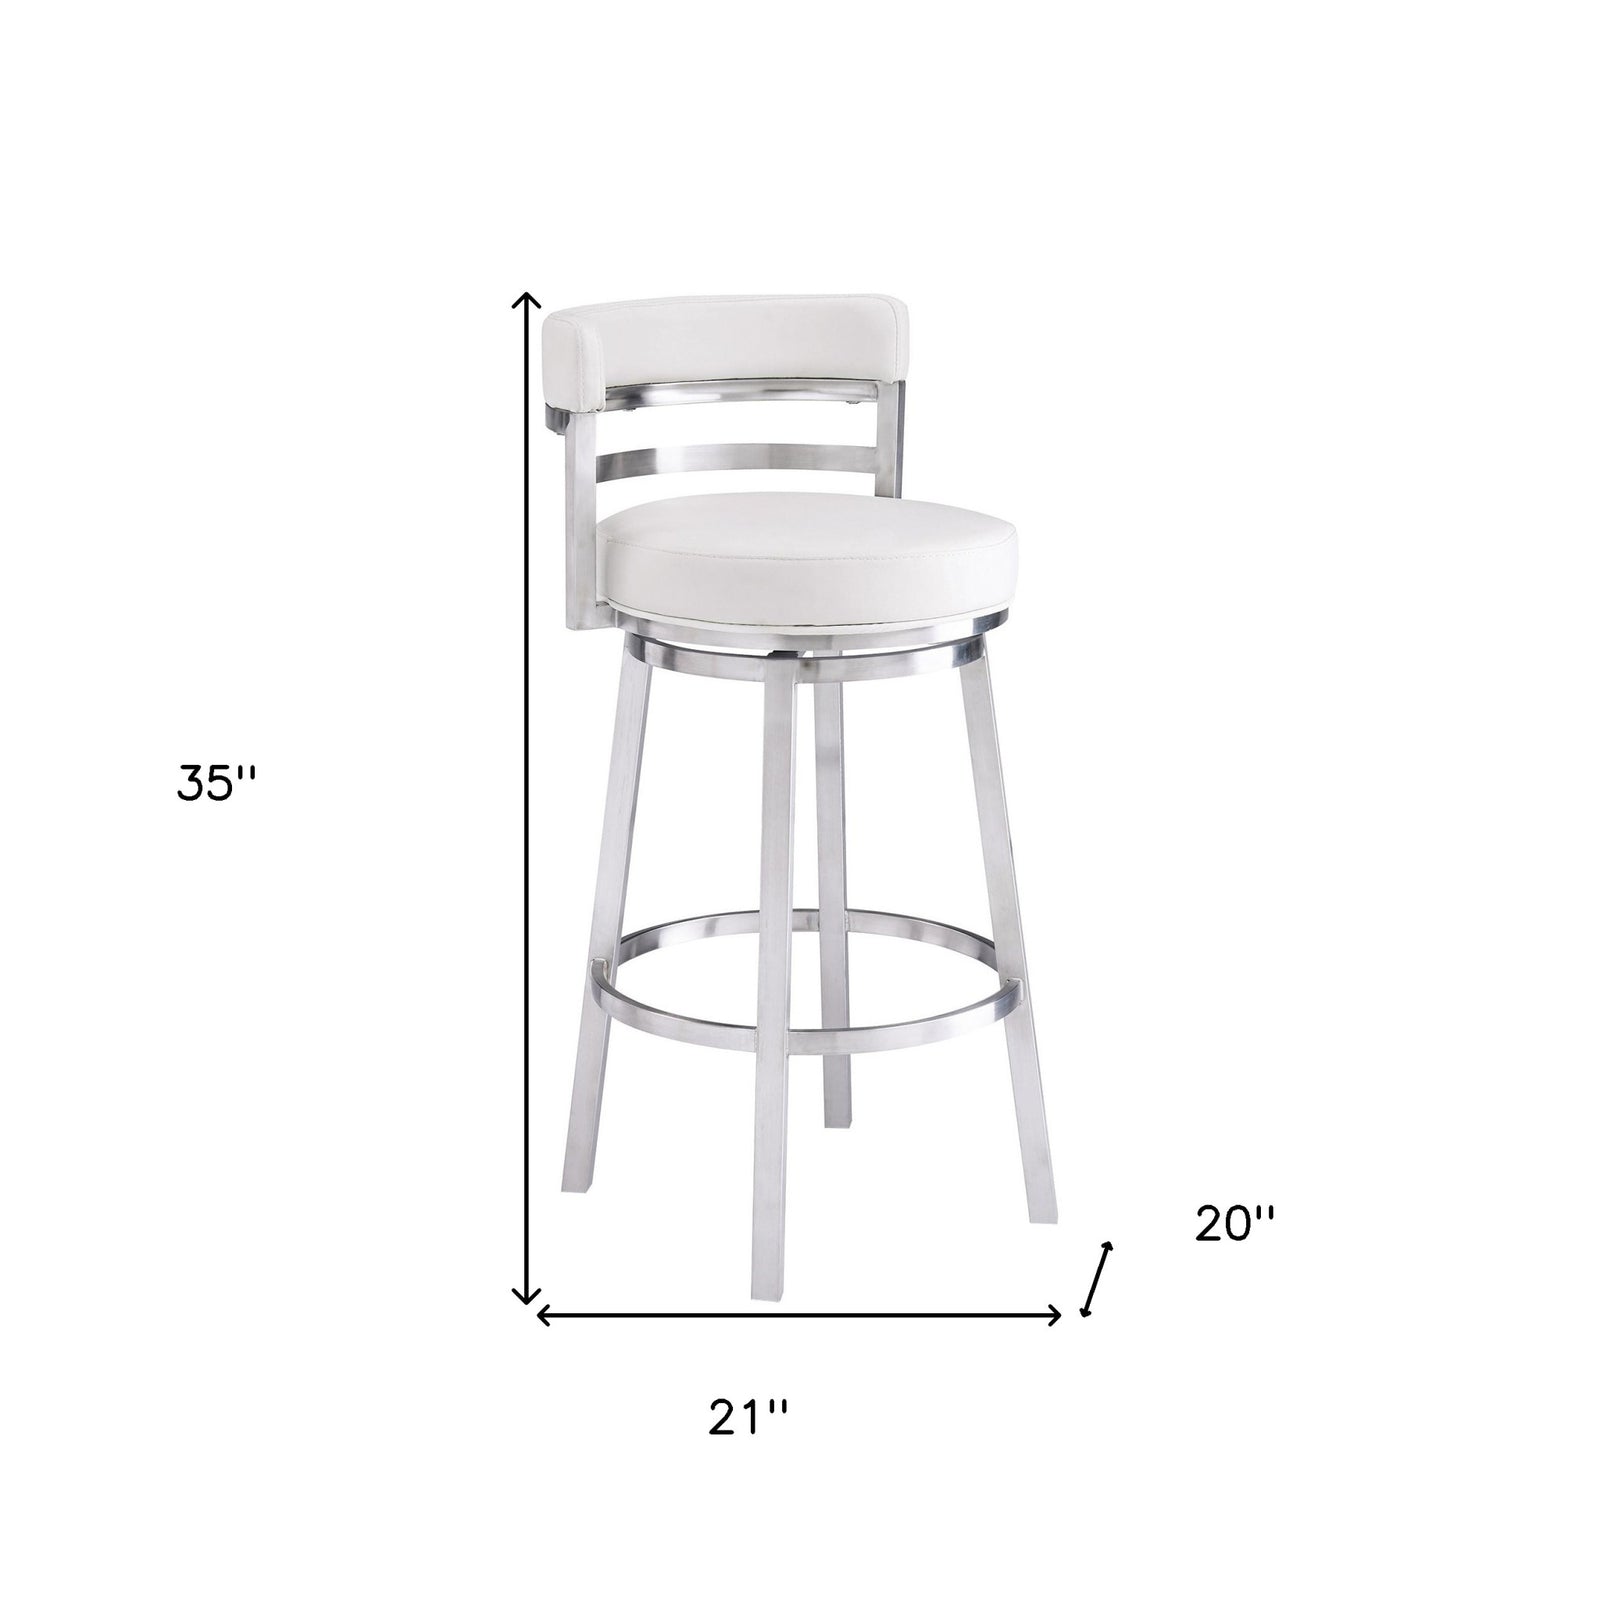 35" White And Silver Faux Leather And Iron Swivel Low Back Counter Height Bar Chair With Footrest